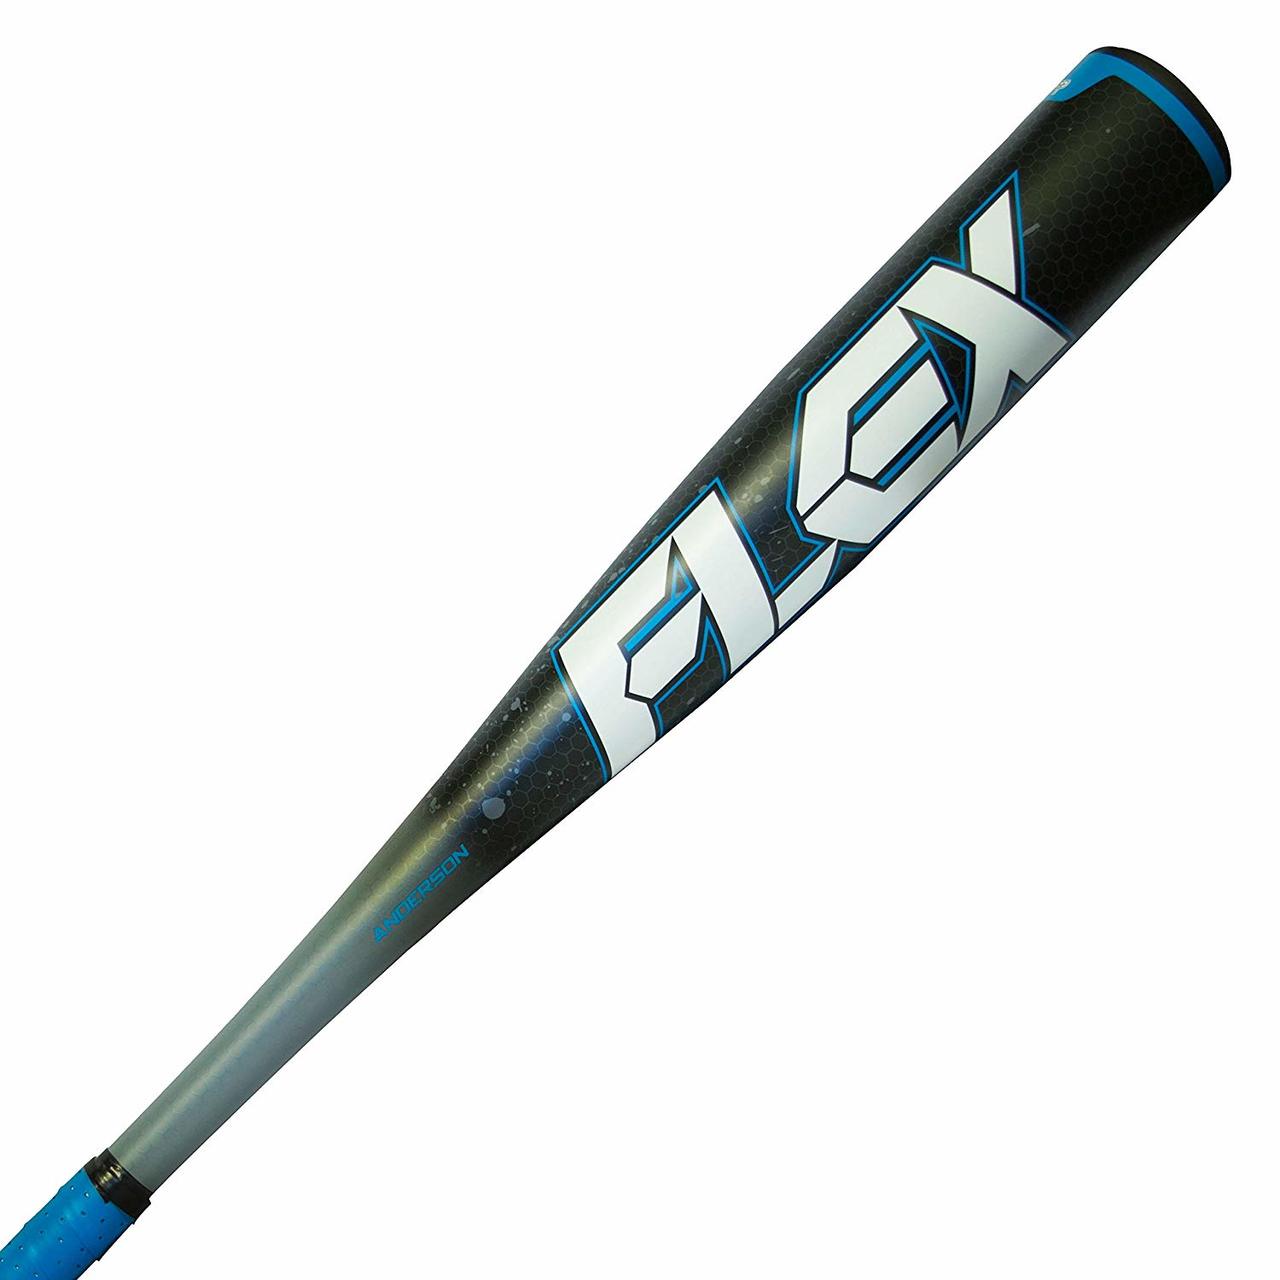 anderson-flex-bbcor-baseball-bat-3oz-014016-34-inch-31-oz 014016-3431 Anderson 874147008737 <p>Type a description for this product here...</p>    